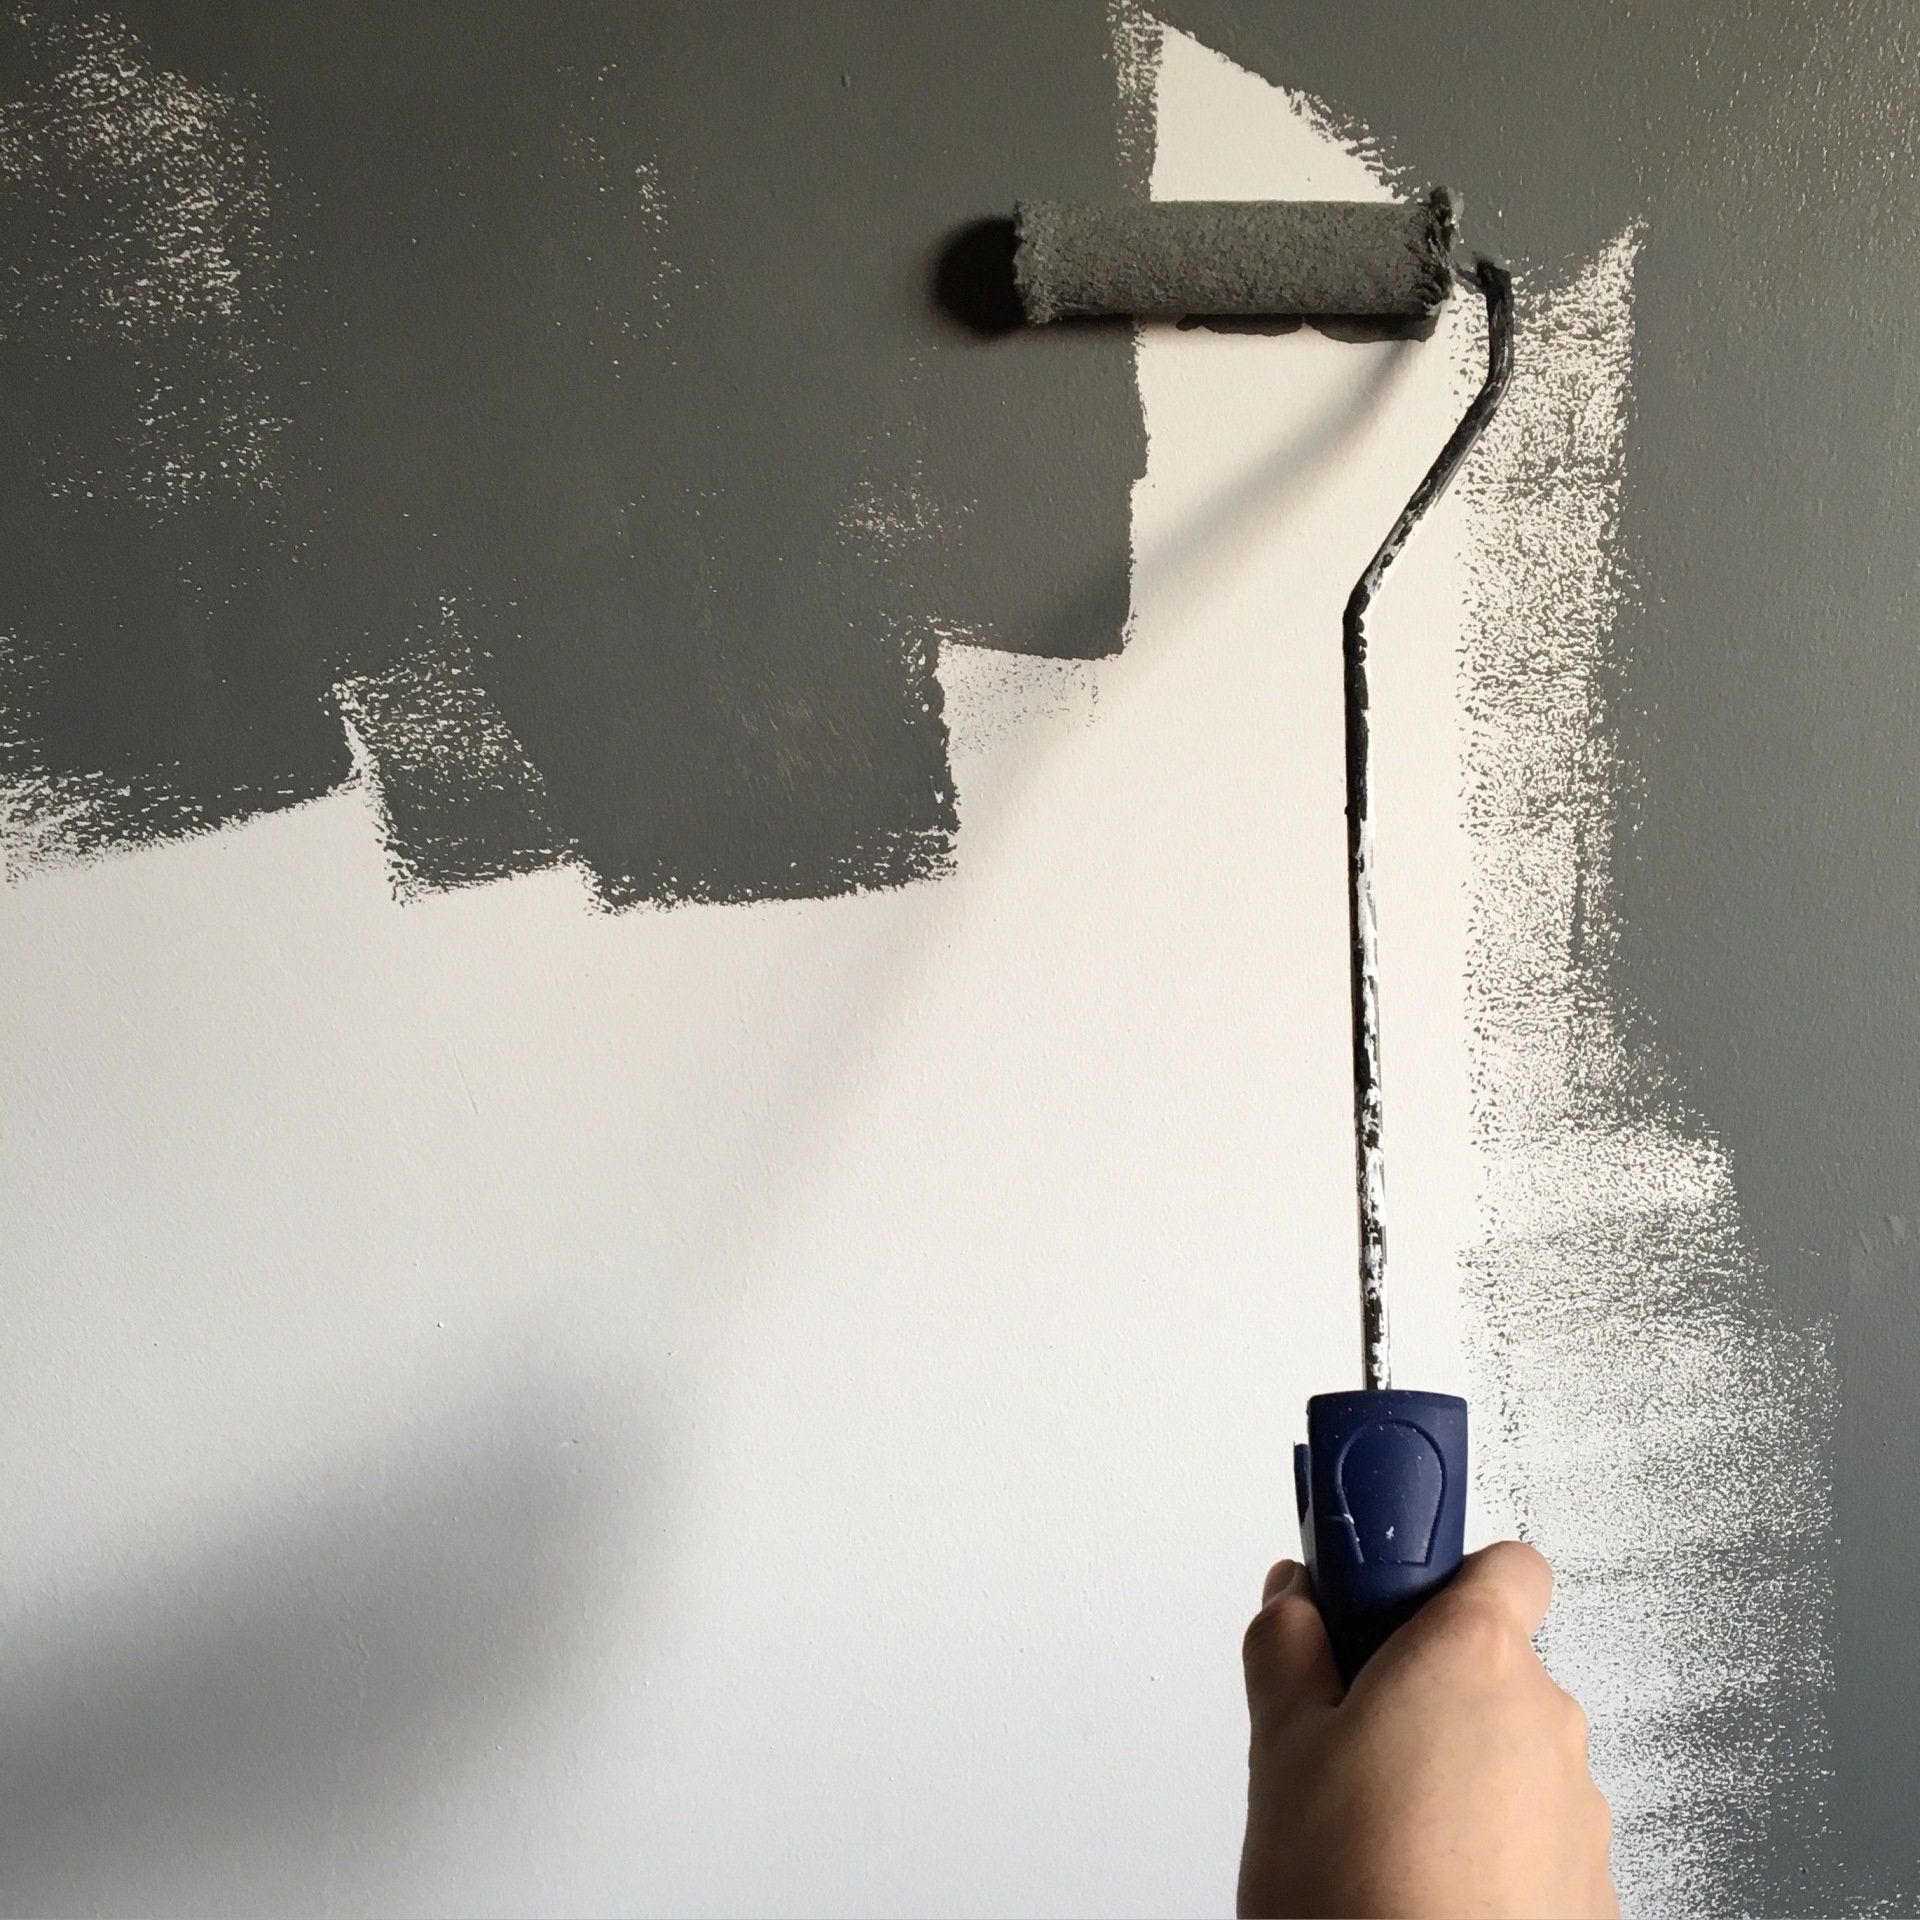 Painting grey on a white wall